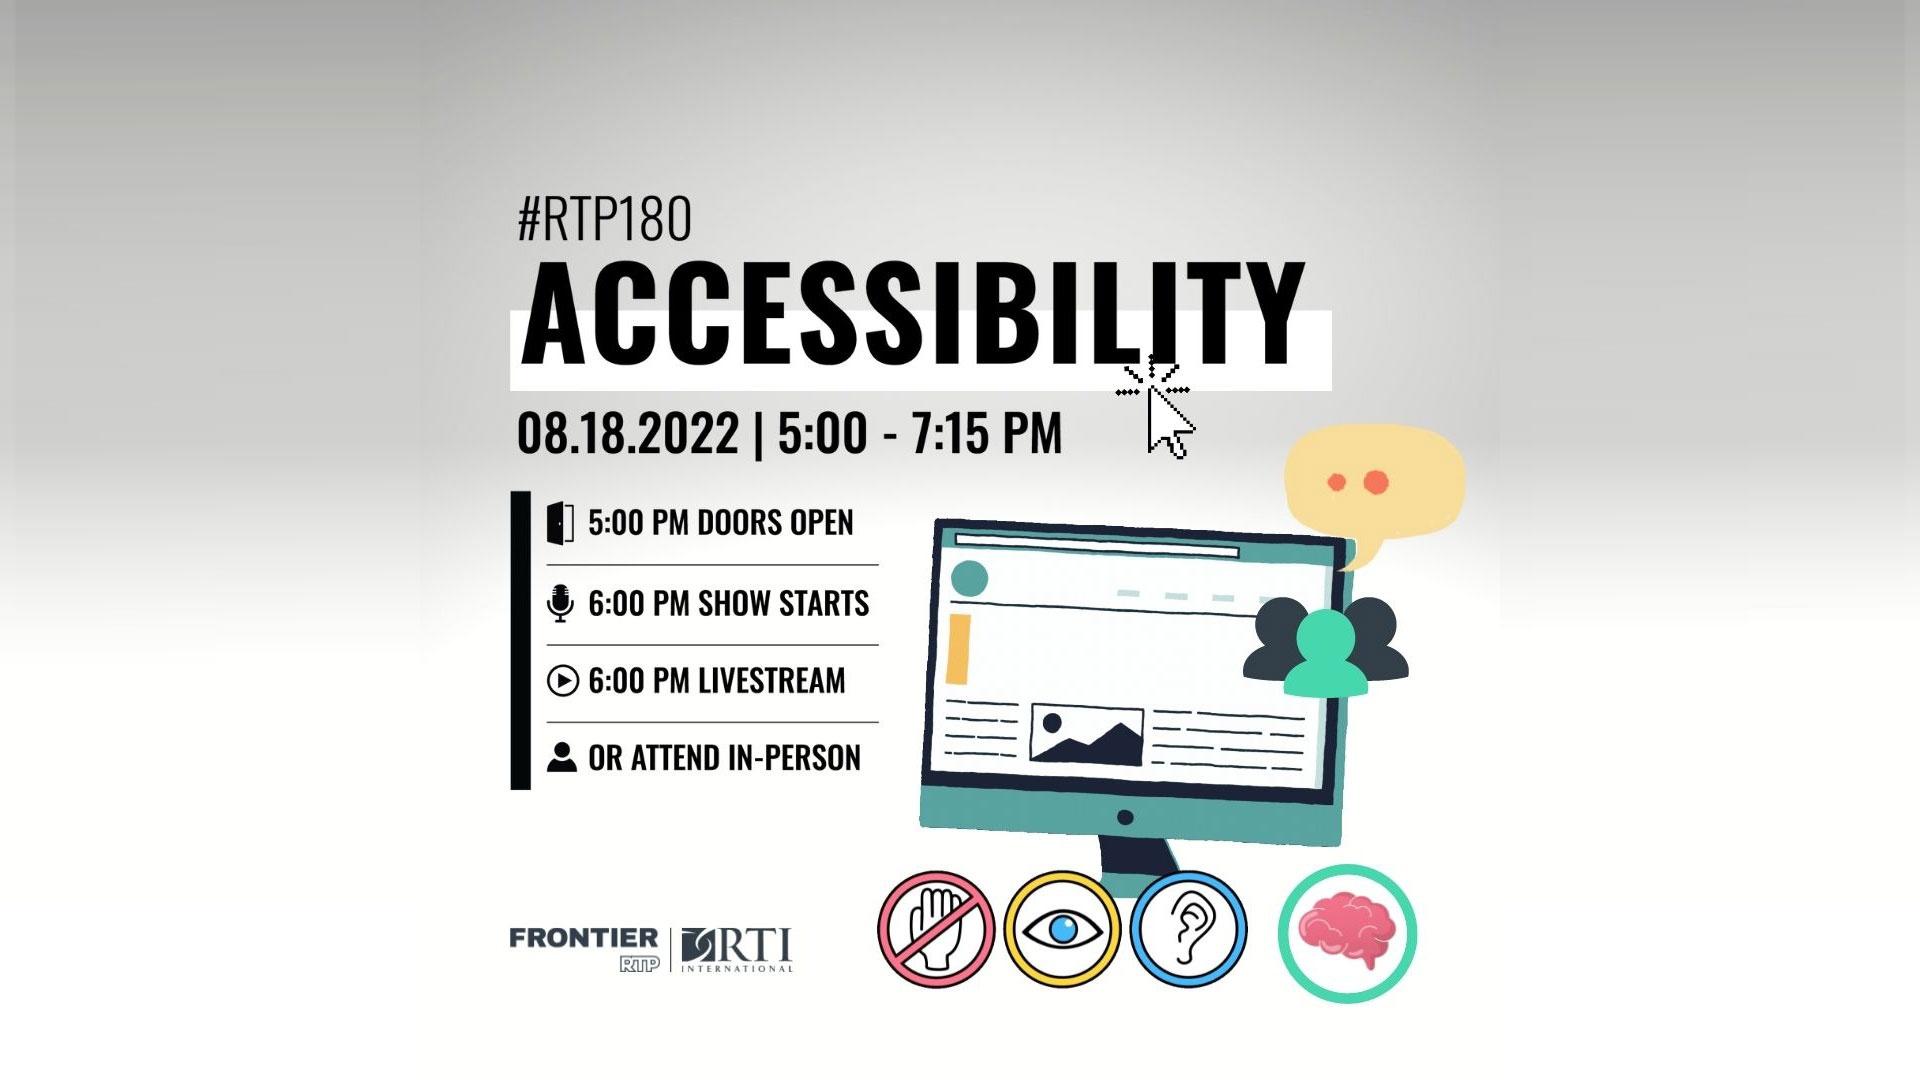 An image with event information in text an icon of a computer screen, a speech bubble and people forms, with the Frontier and RTI logos.. The text reads #RTP180 Accessibility on 8/18/22 from 5-7:15 PM. Doors open at 5 PM, show starts at 6 PM in person and via livestream